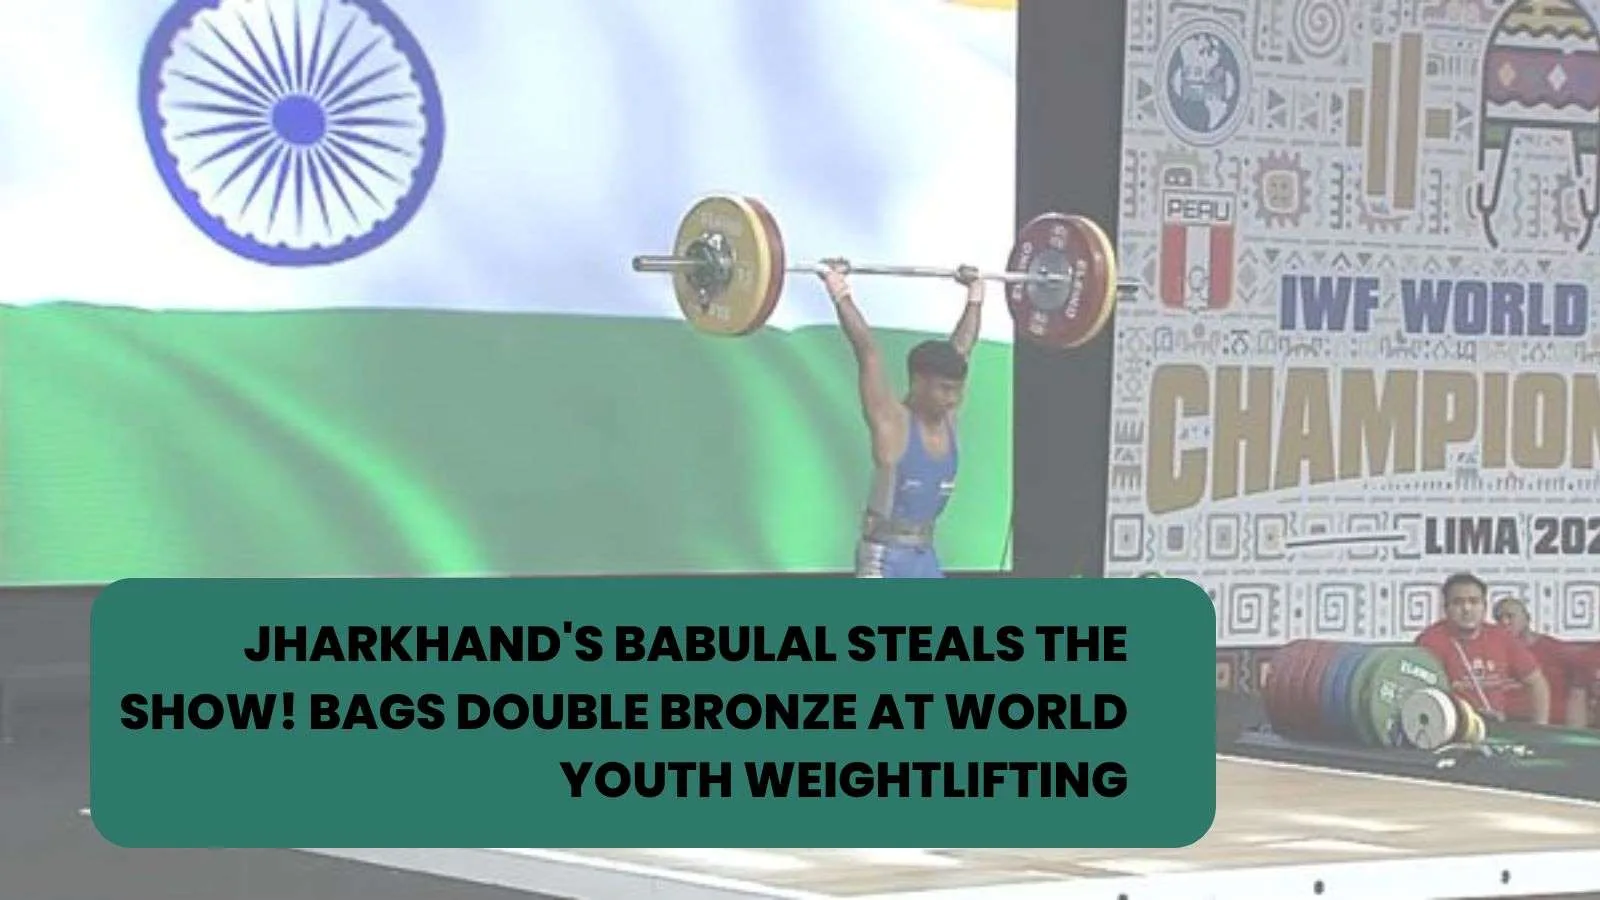 Jharkhand's Babulal Steals the Show! Bags Double Bronze at World Youth Weightlifting